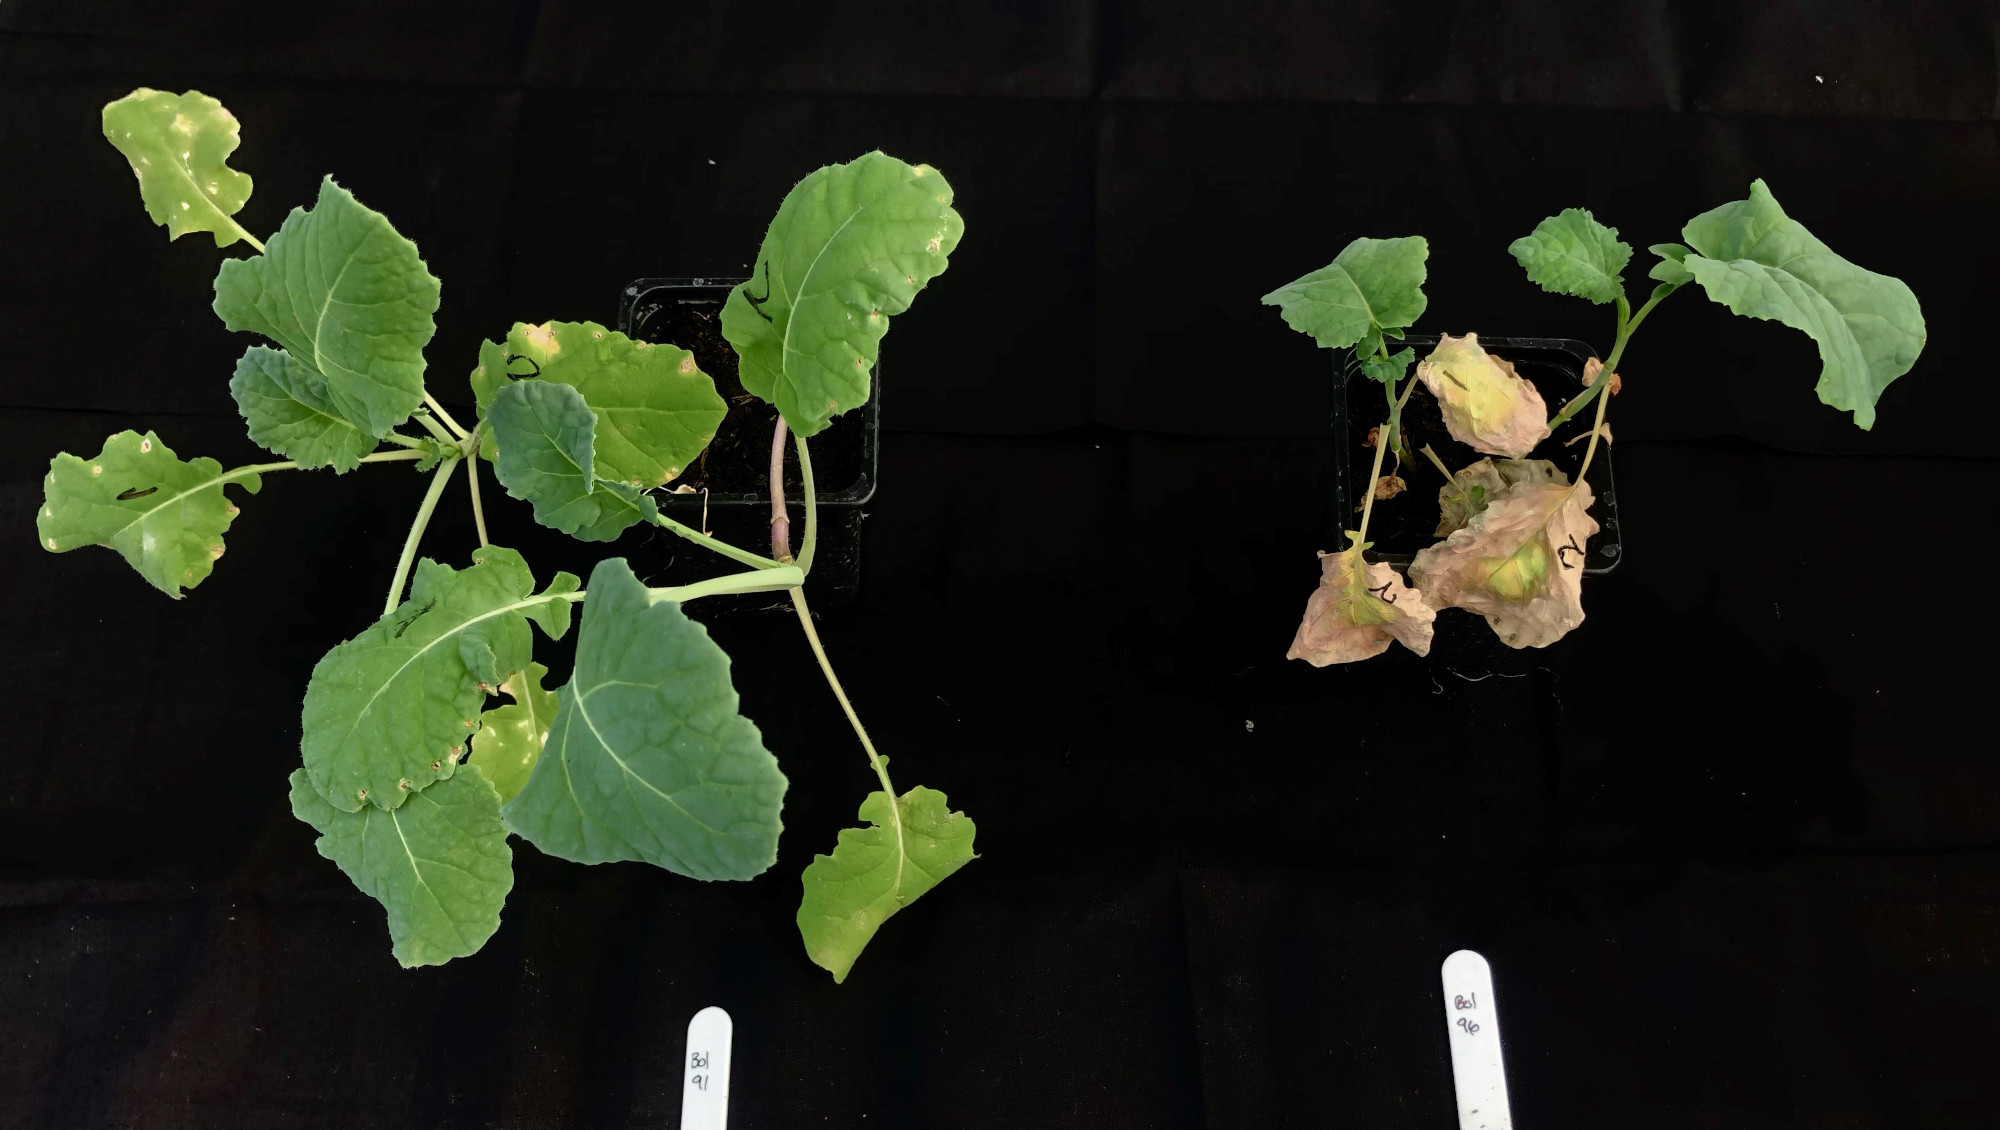 RvS B. oleracea DFFS lines_left hand shows healthy brassica plant right hand shows diseased plant infected with the bacteria Xanthomonas